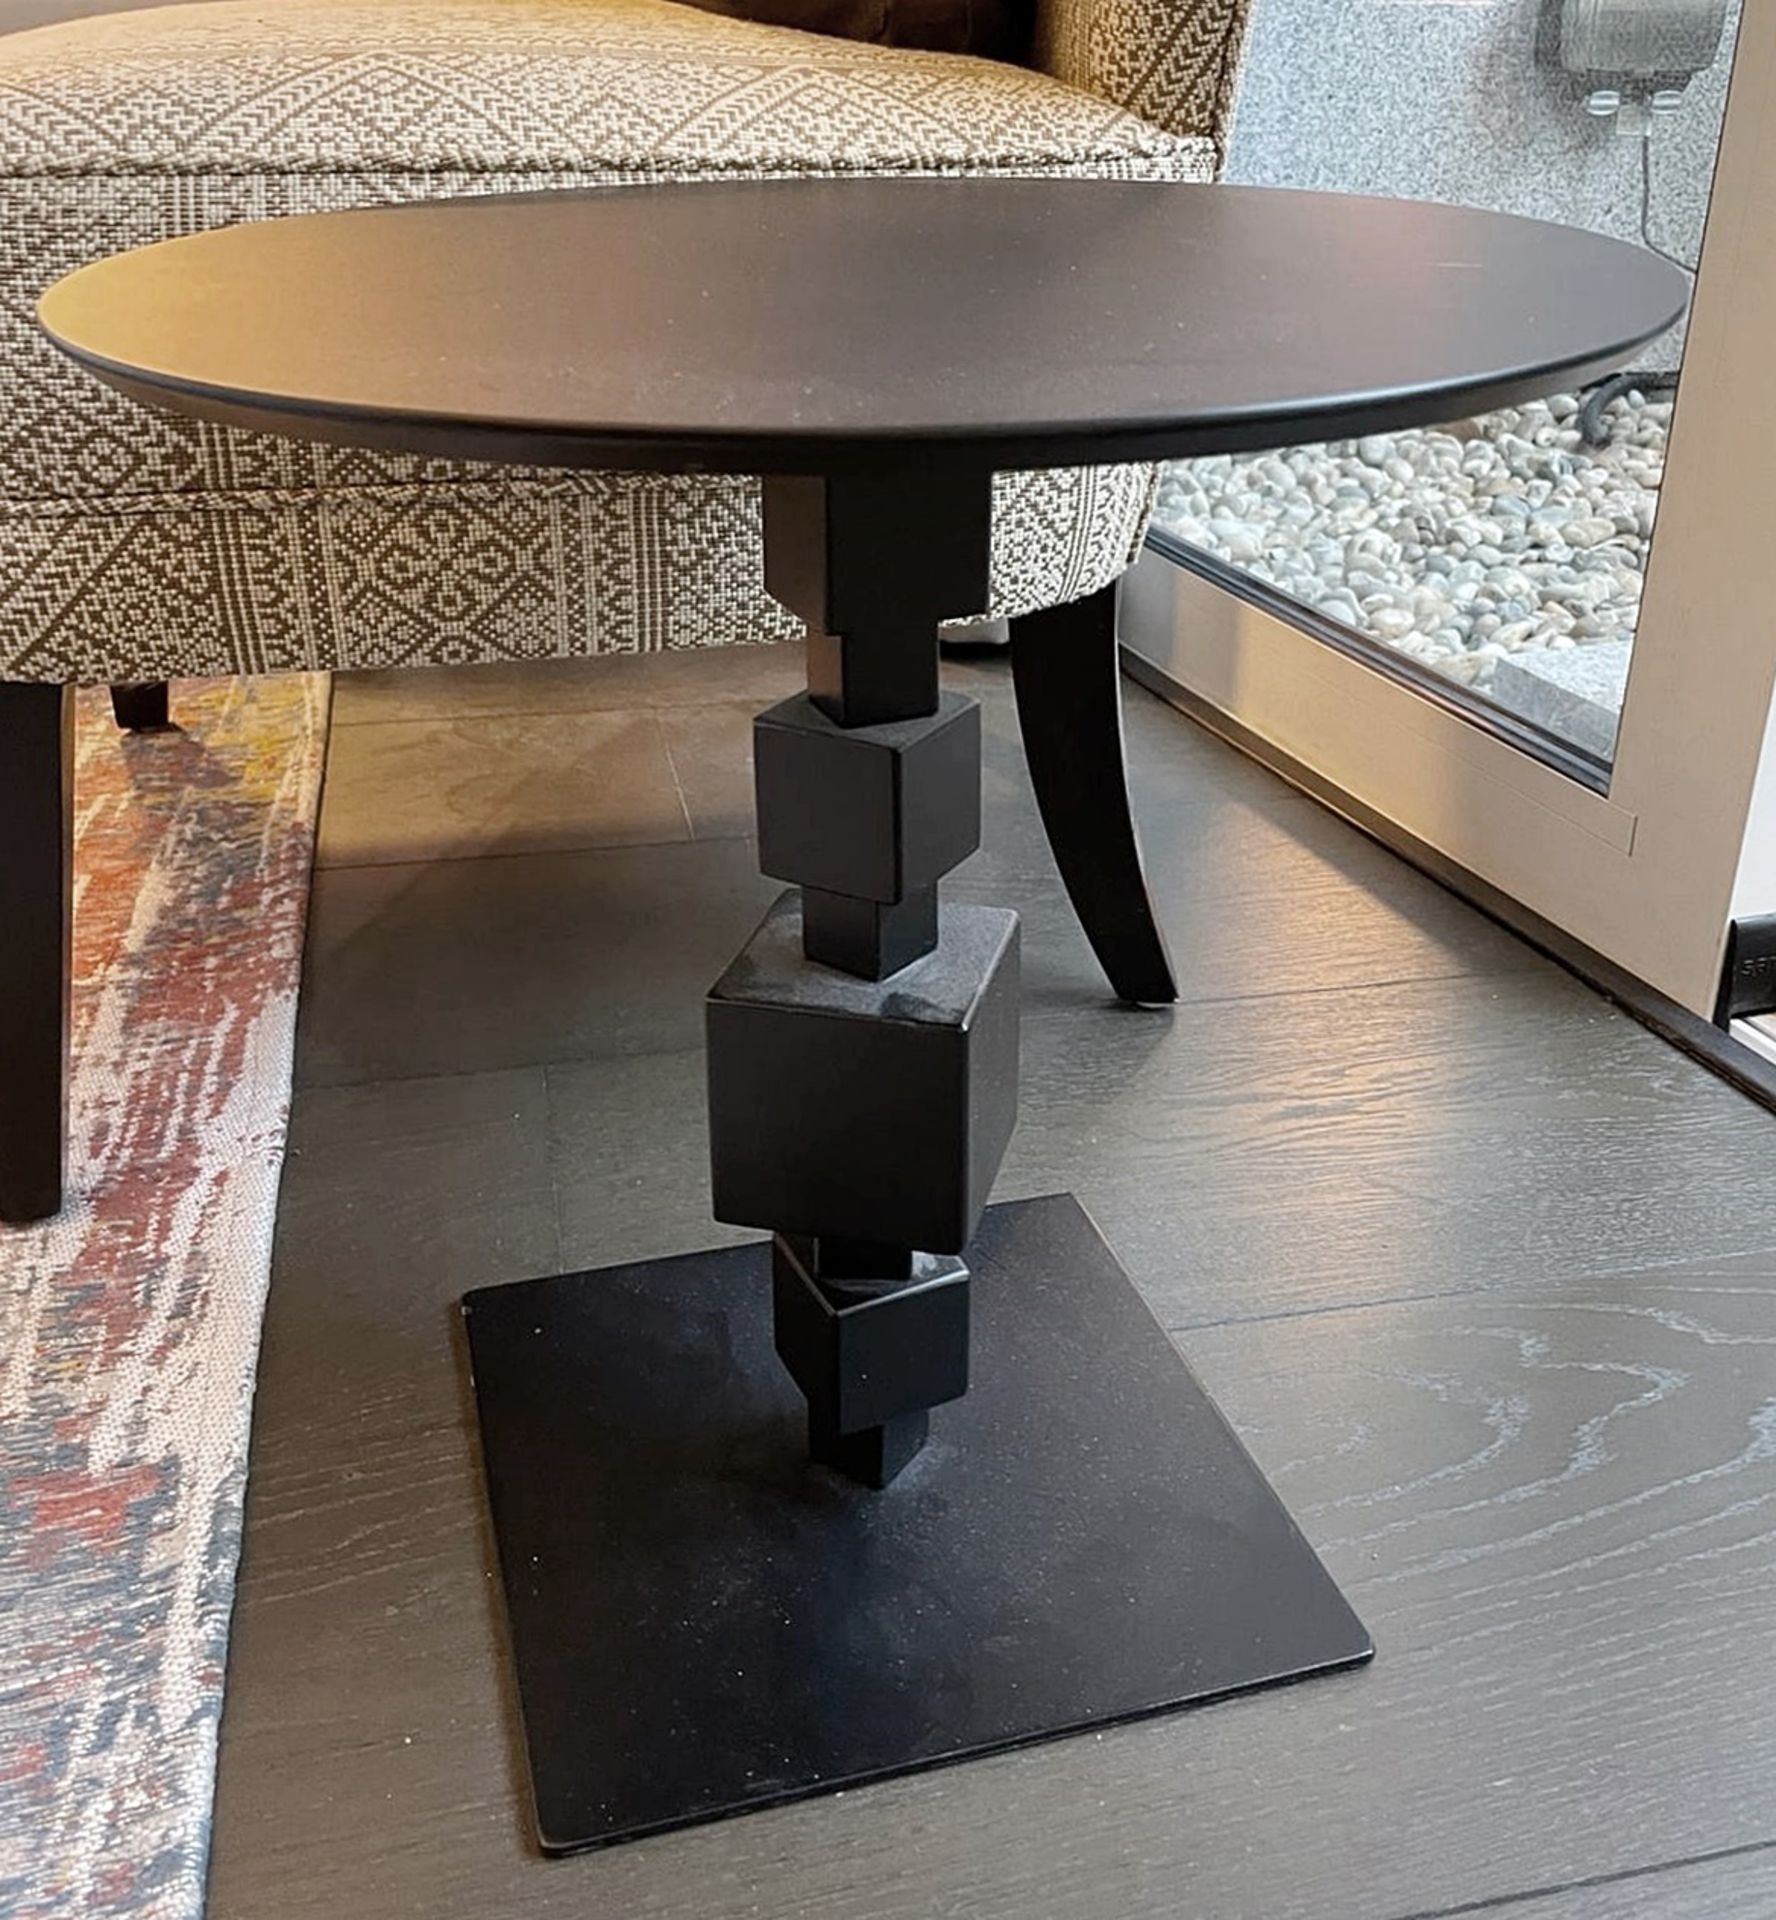 1 x NOLITA Occasional Side Table with a Cubed Metal Base, Bronzed Finish and Industrial - Image 4 of 5